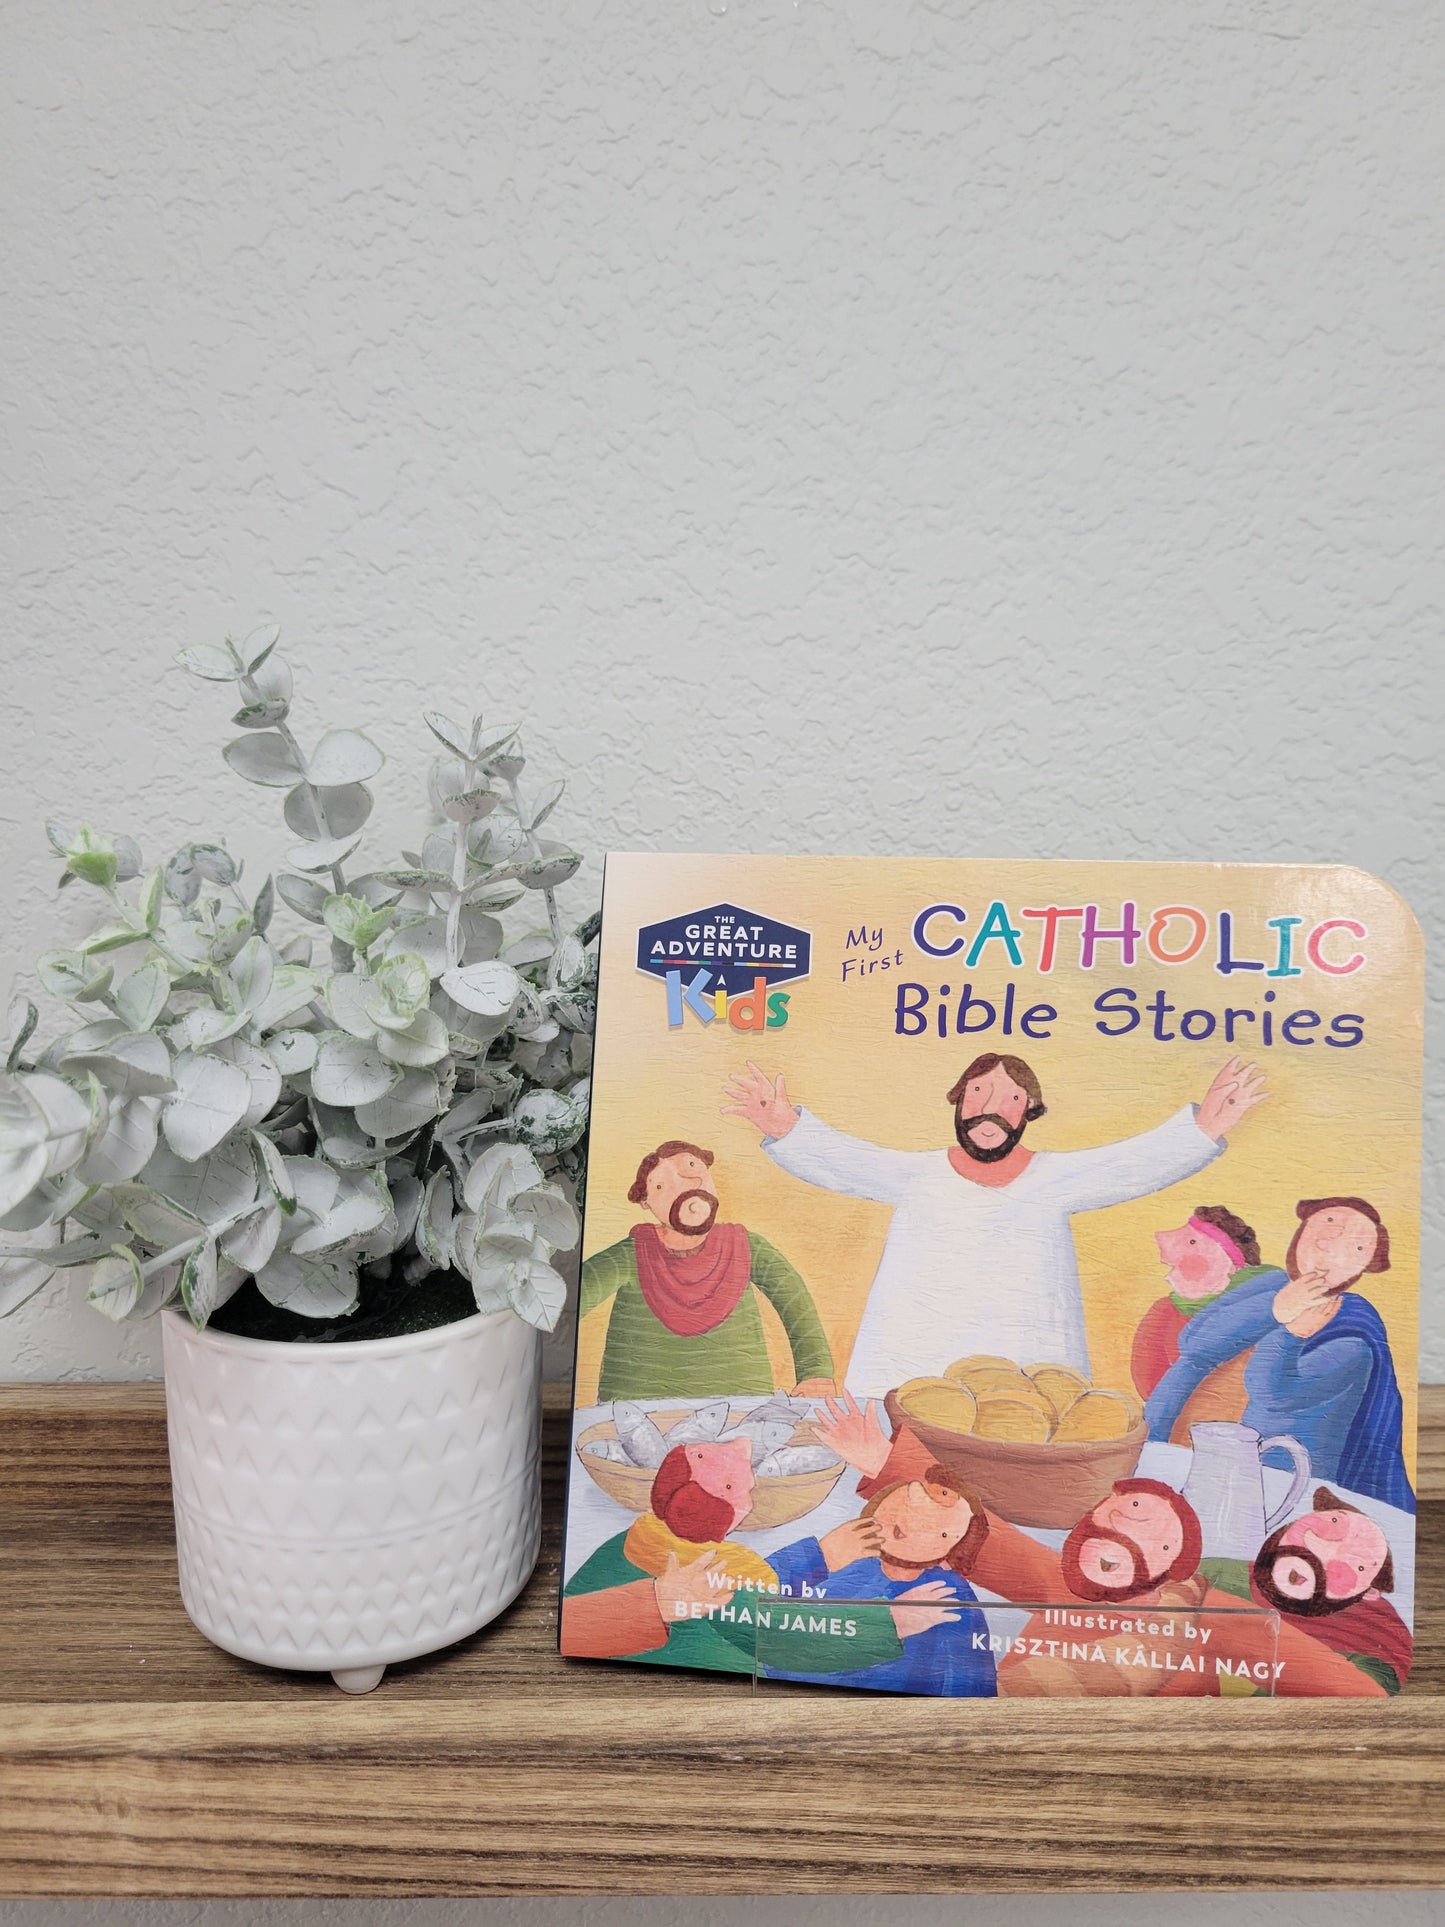 My First Catholic Bible Stories ages 1-3